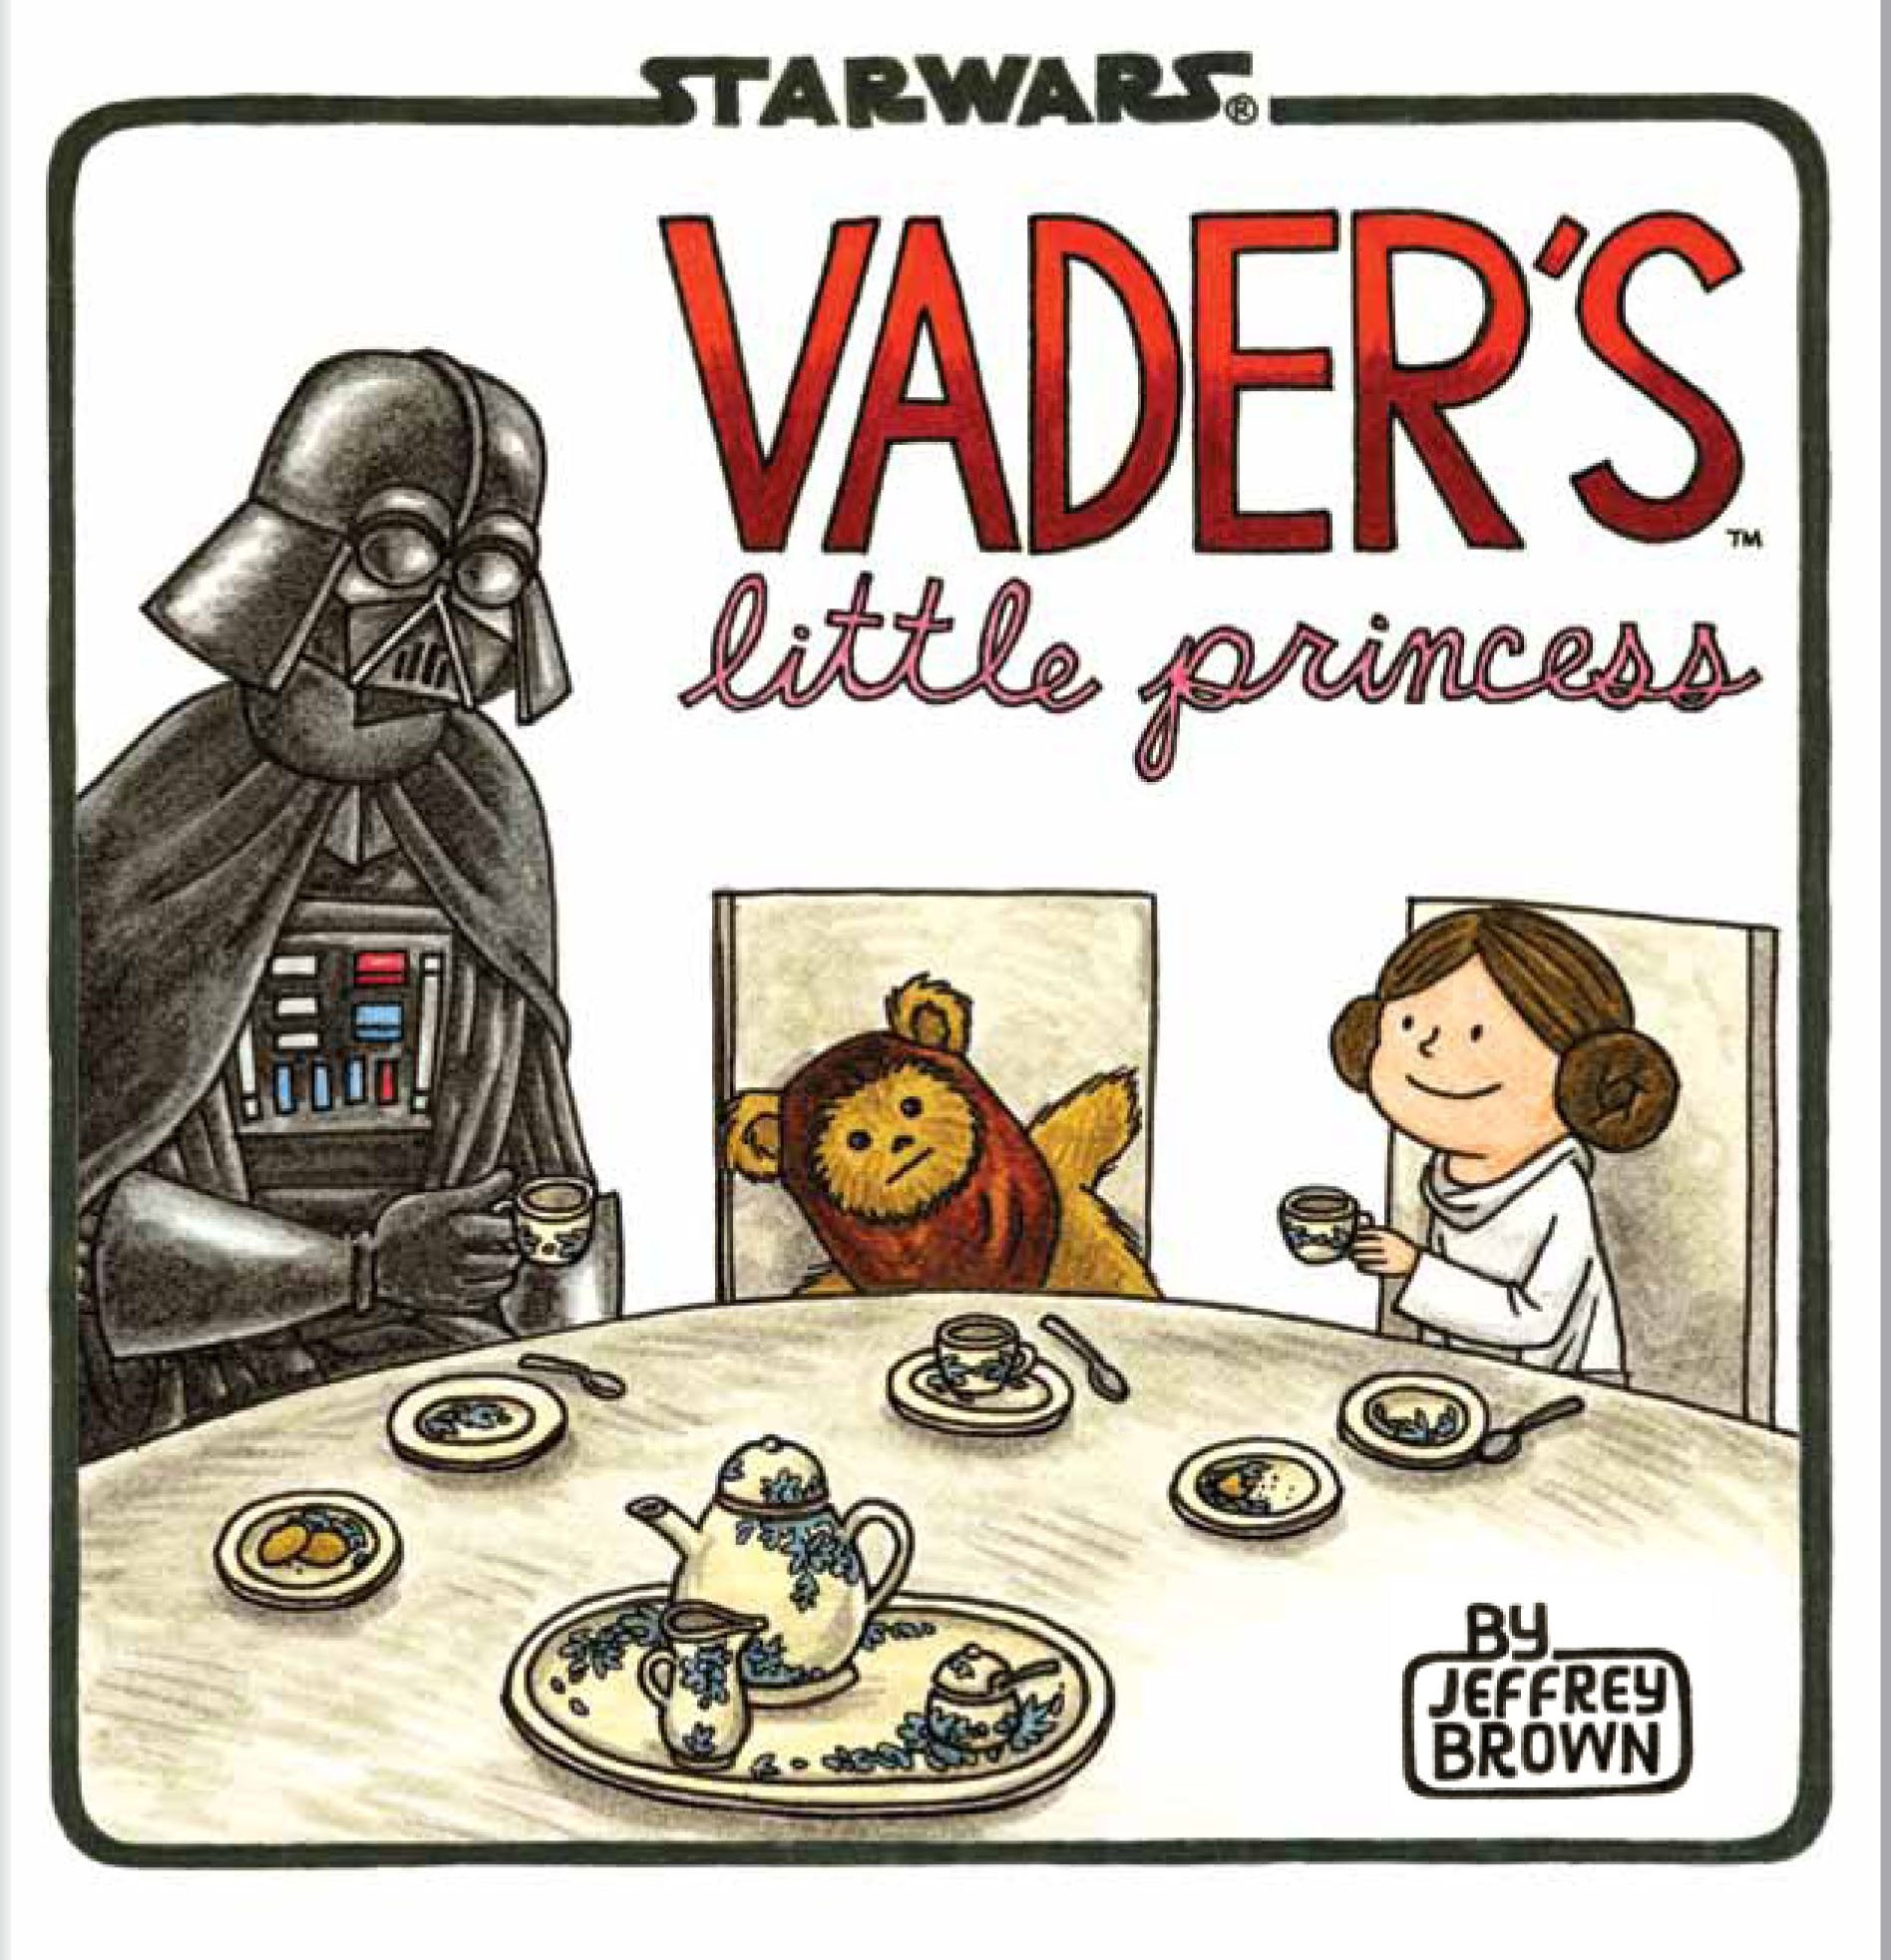 Vader's Little Princess - A Children's Book by Jeffrey Brown (Hardcover, Illustrated)